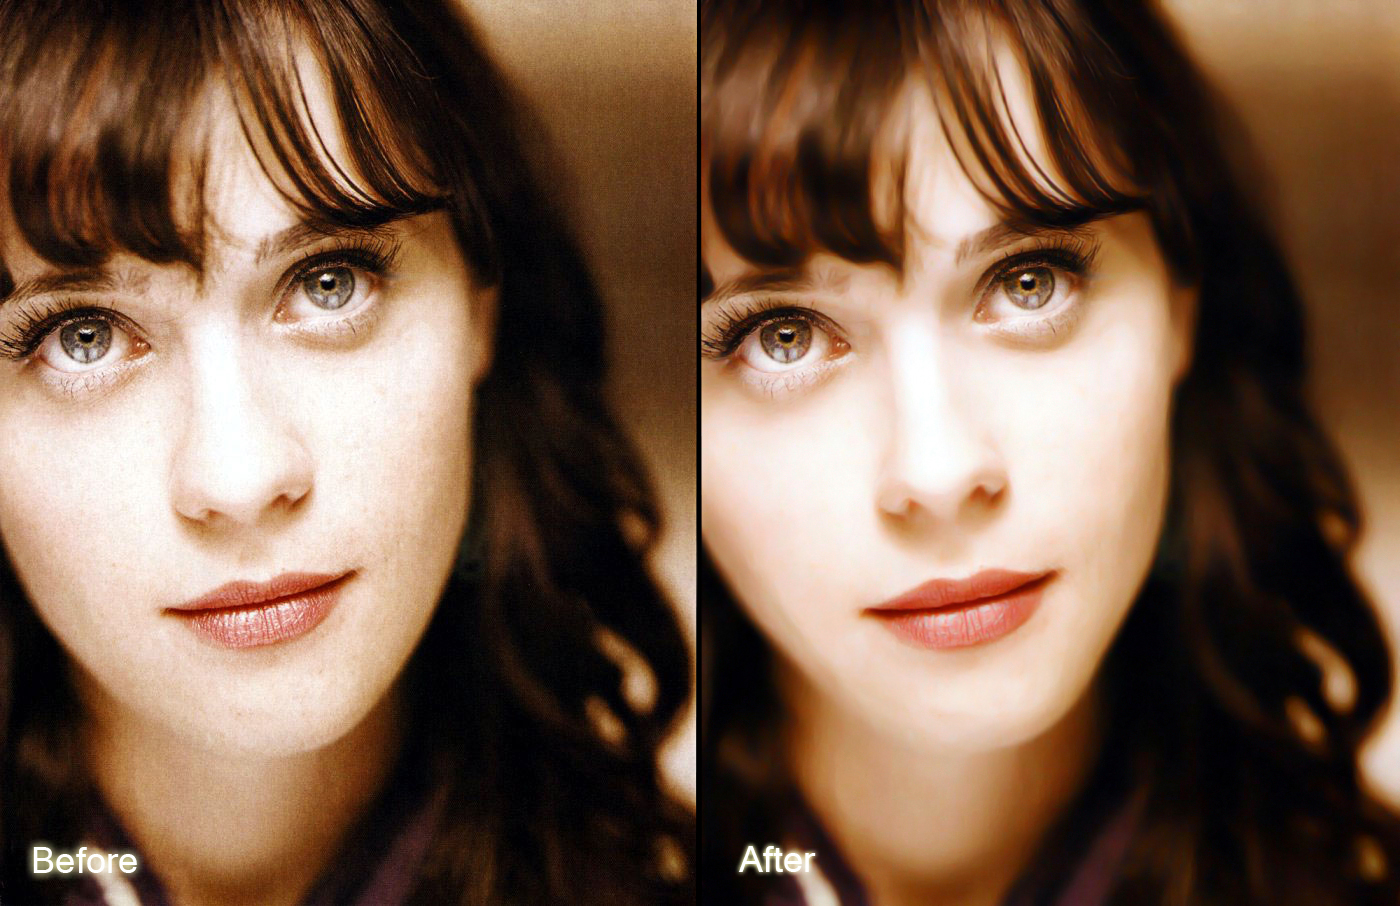 my photoshopped Zooey Deschanel next to a photo-shoot photo , just messin around